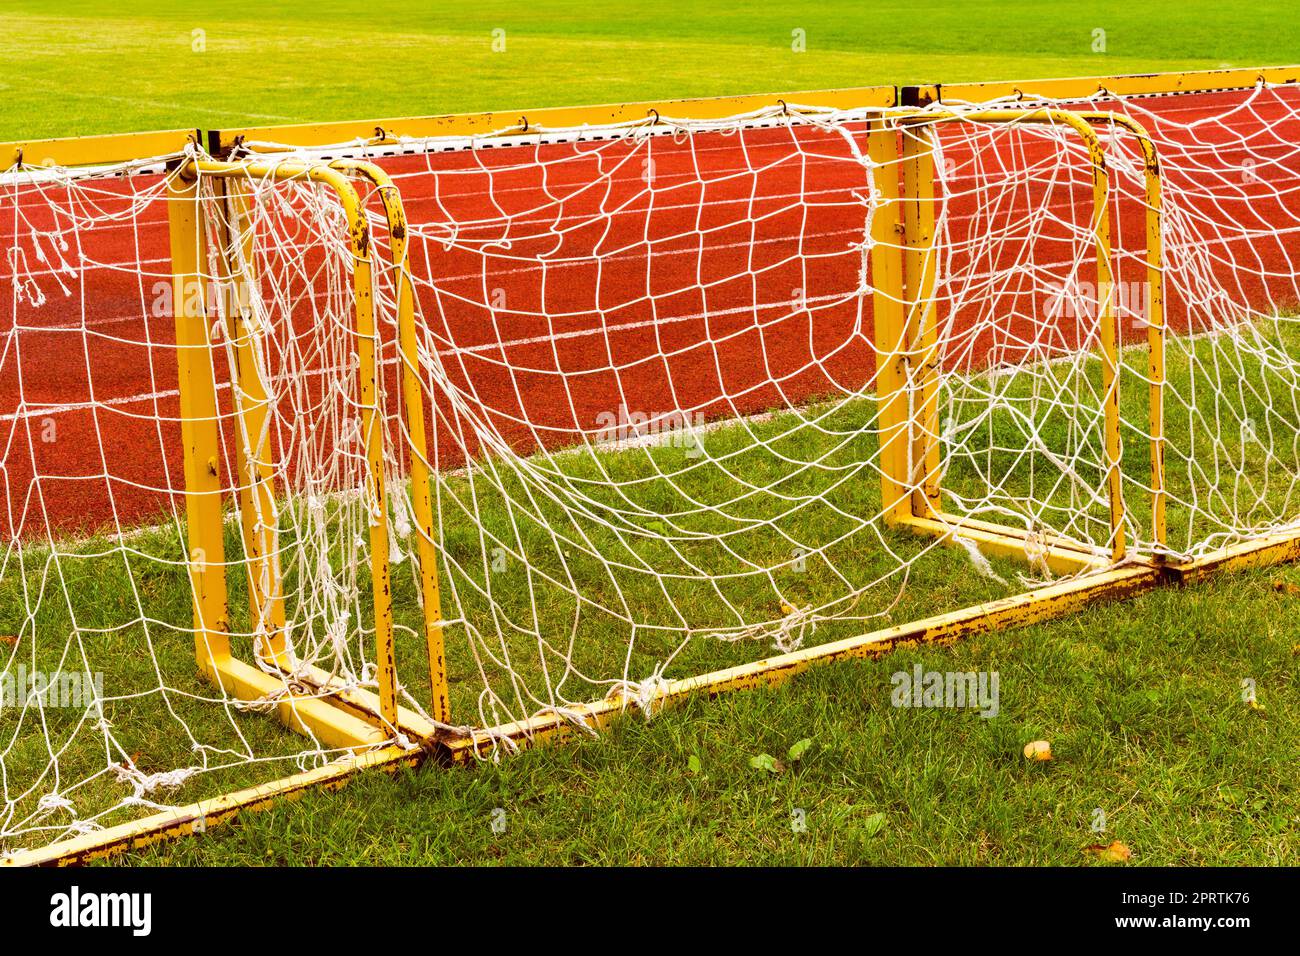 Small football goals lined up next a running track Stock Photo